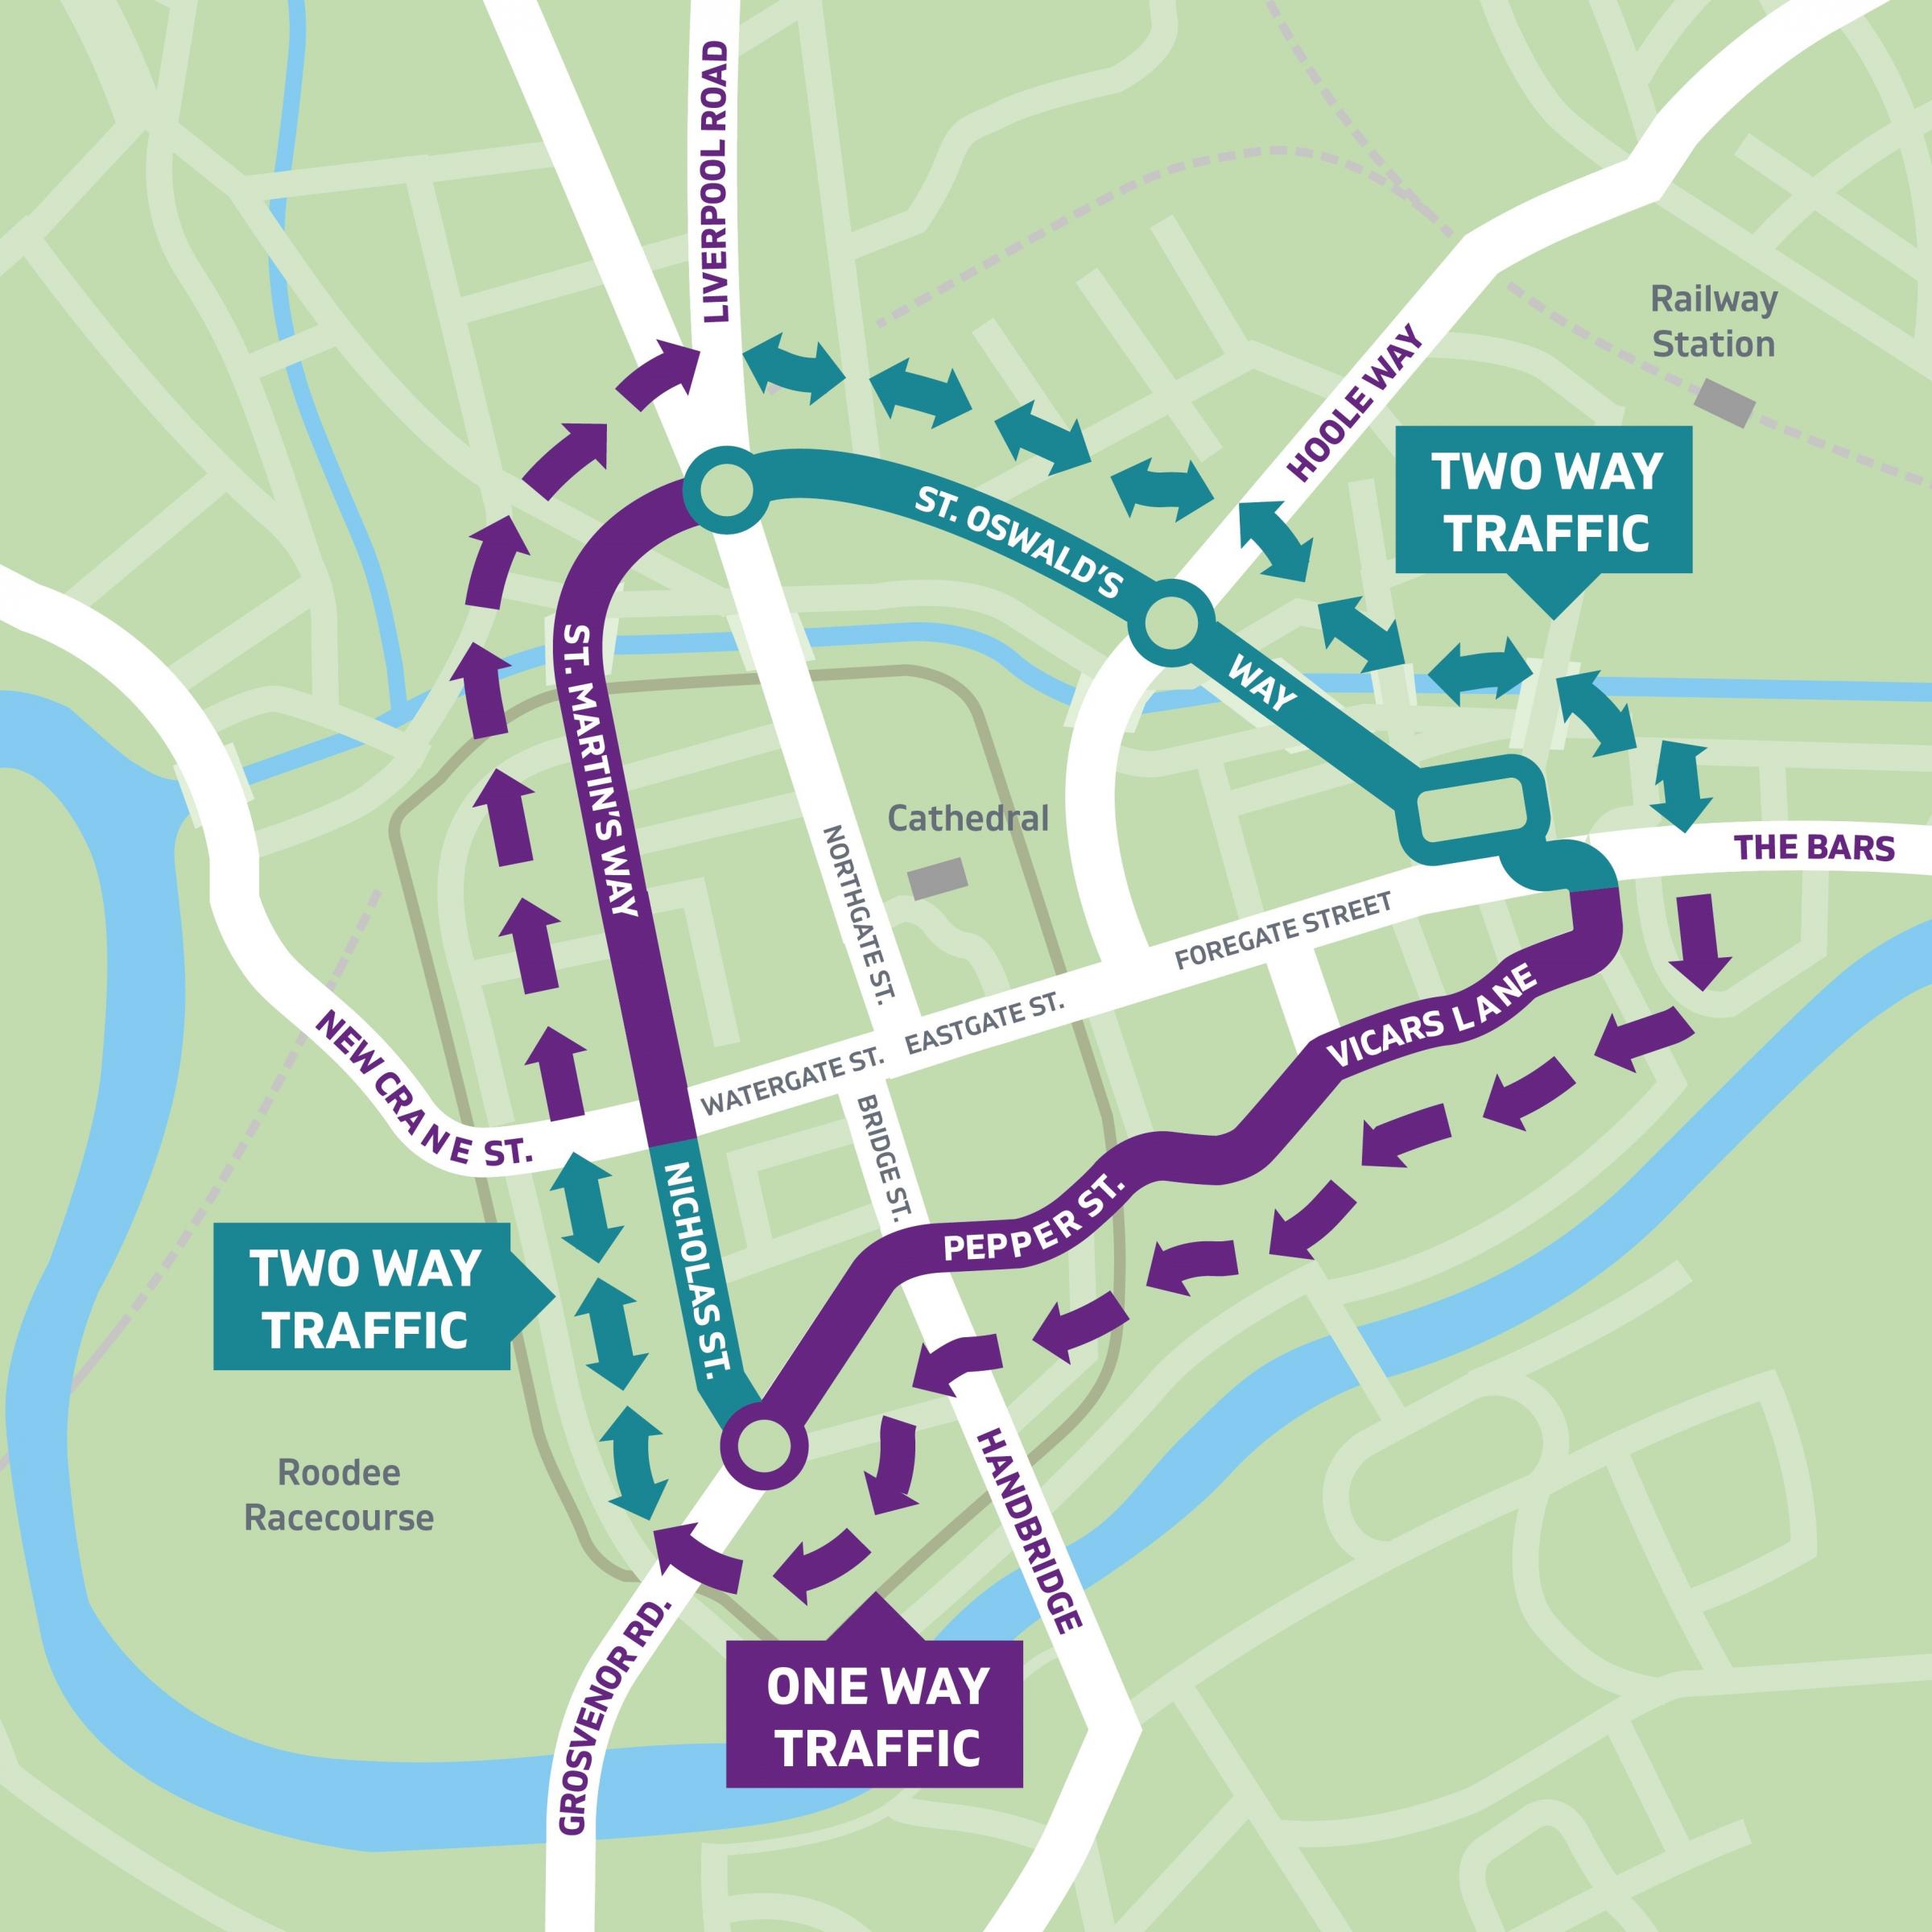 The new-look Clockwise Chester scheme due to come into effect from late October.